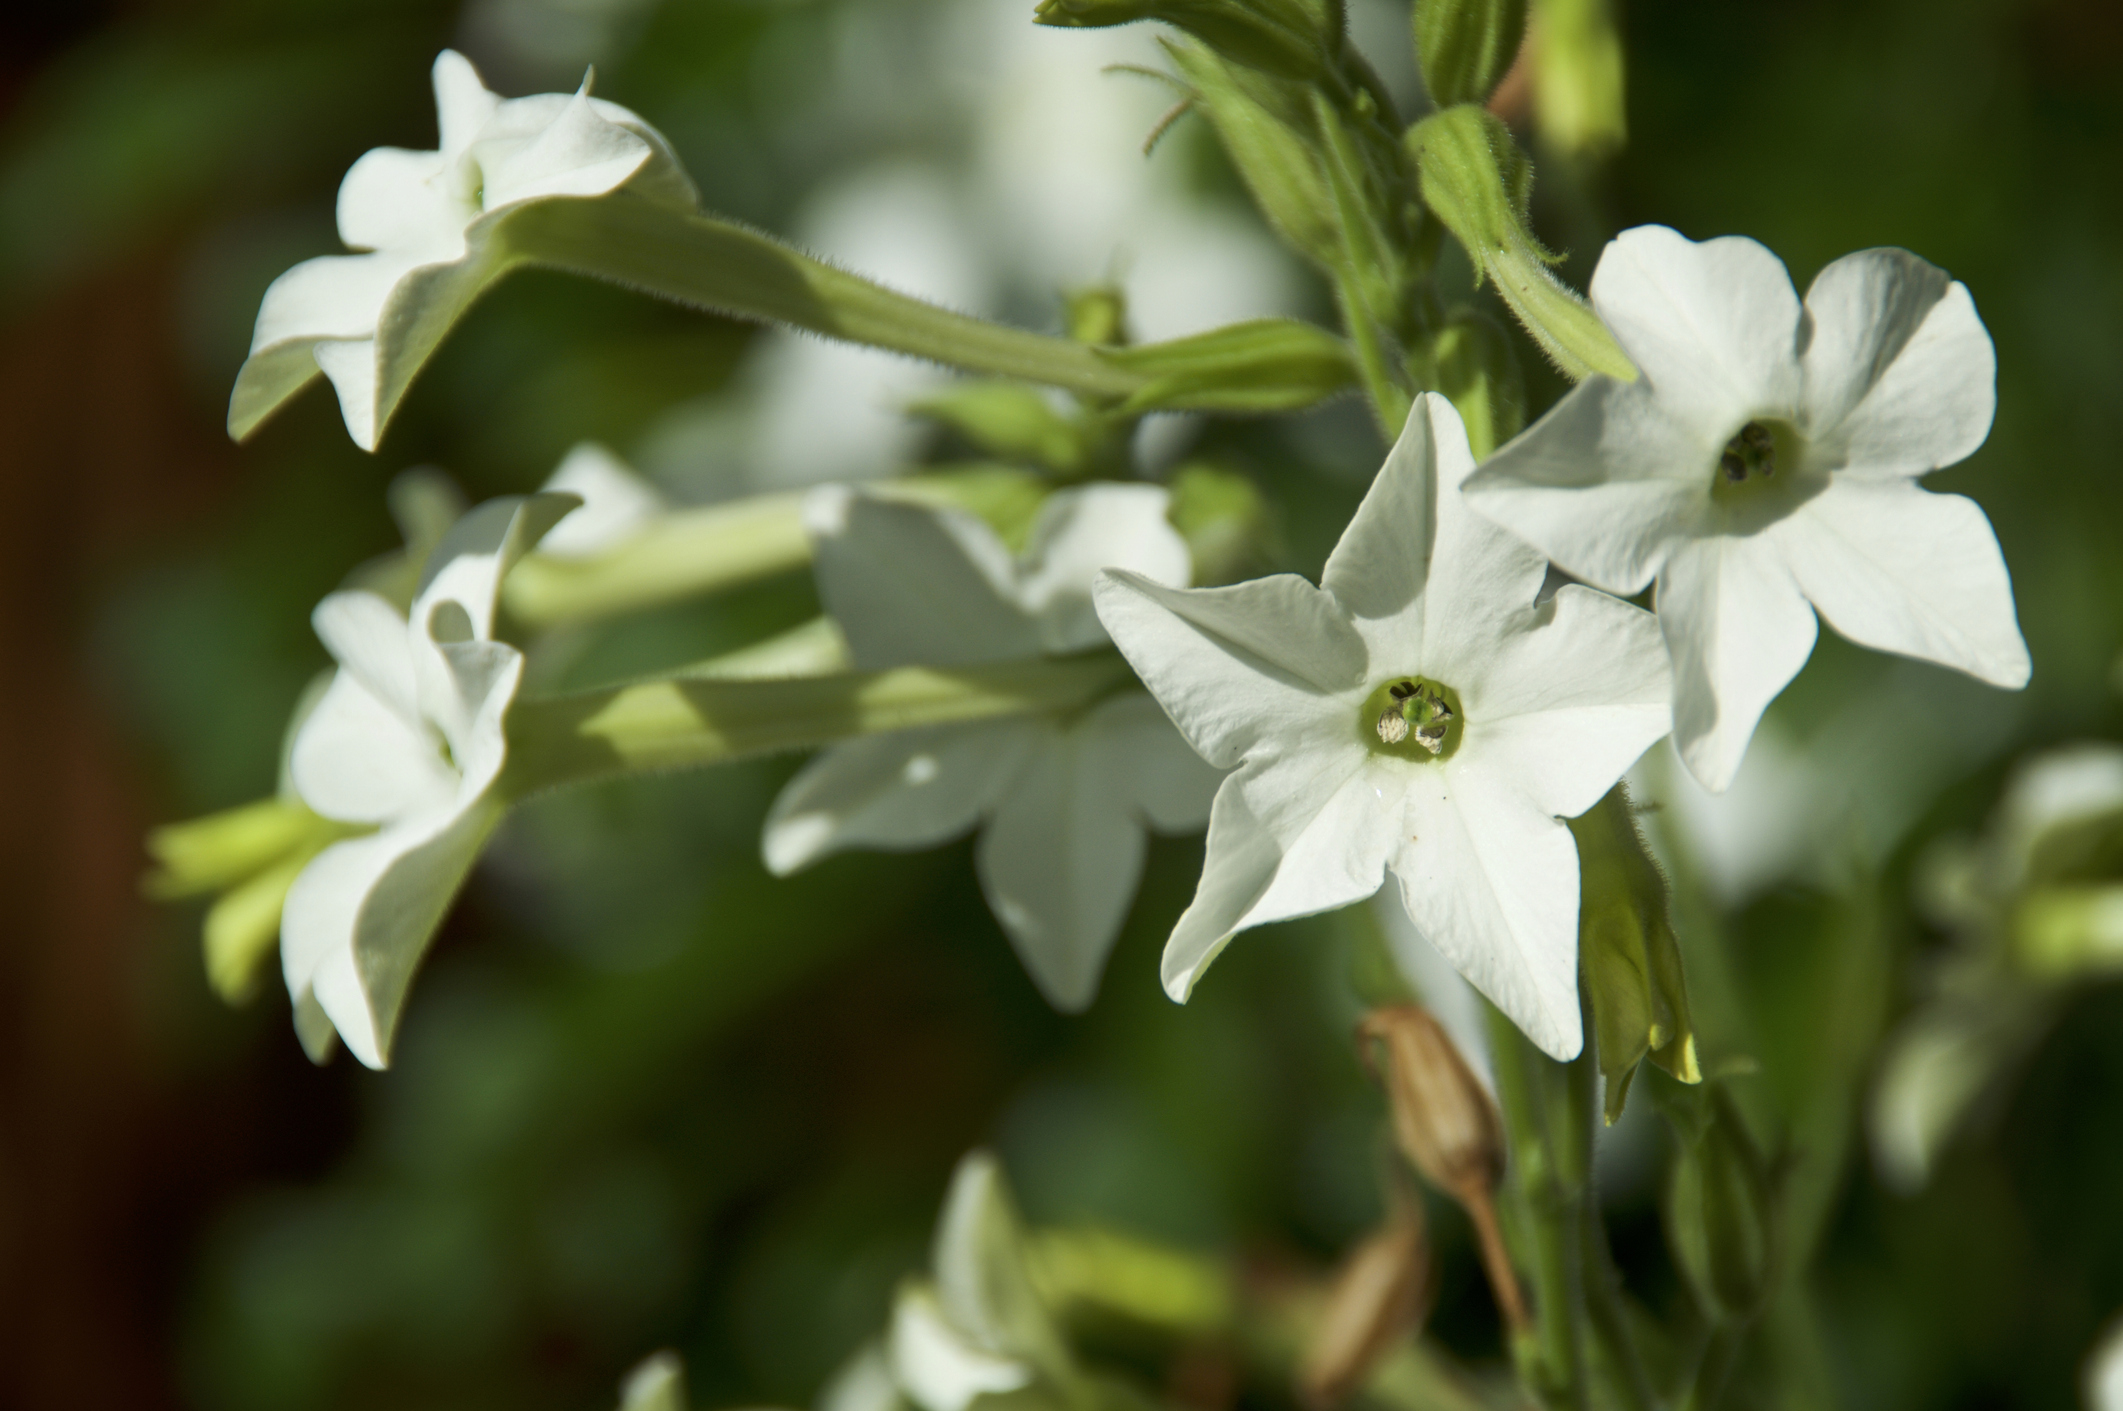 Beautiful close up of white trumpet like flowers of the jasmine tobacco plant